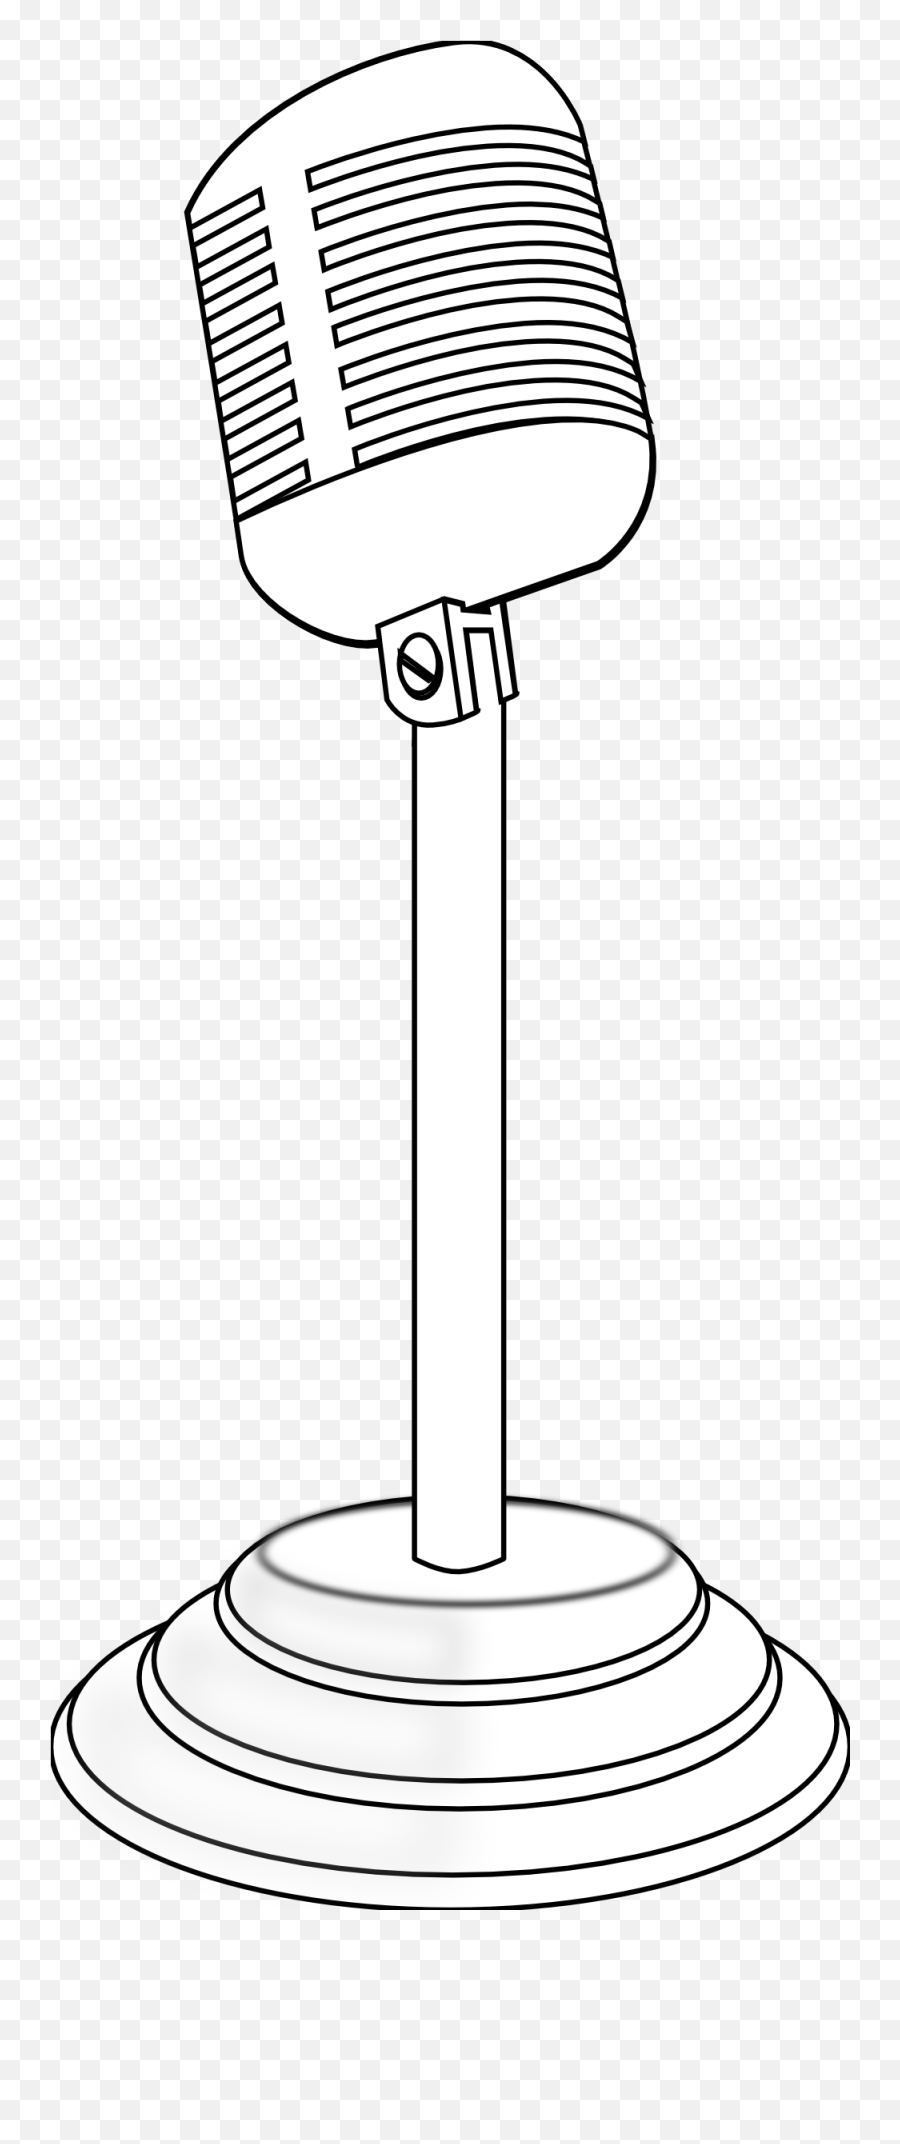 Old Mic Vector - Clipart Best Micro Emoji,Mic Clipart